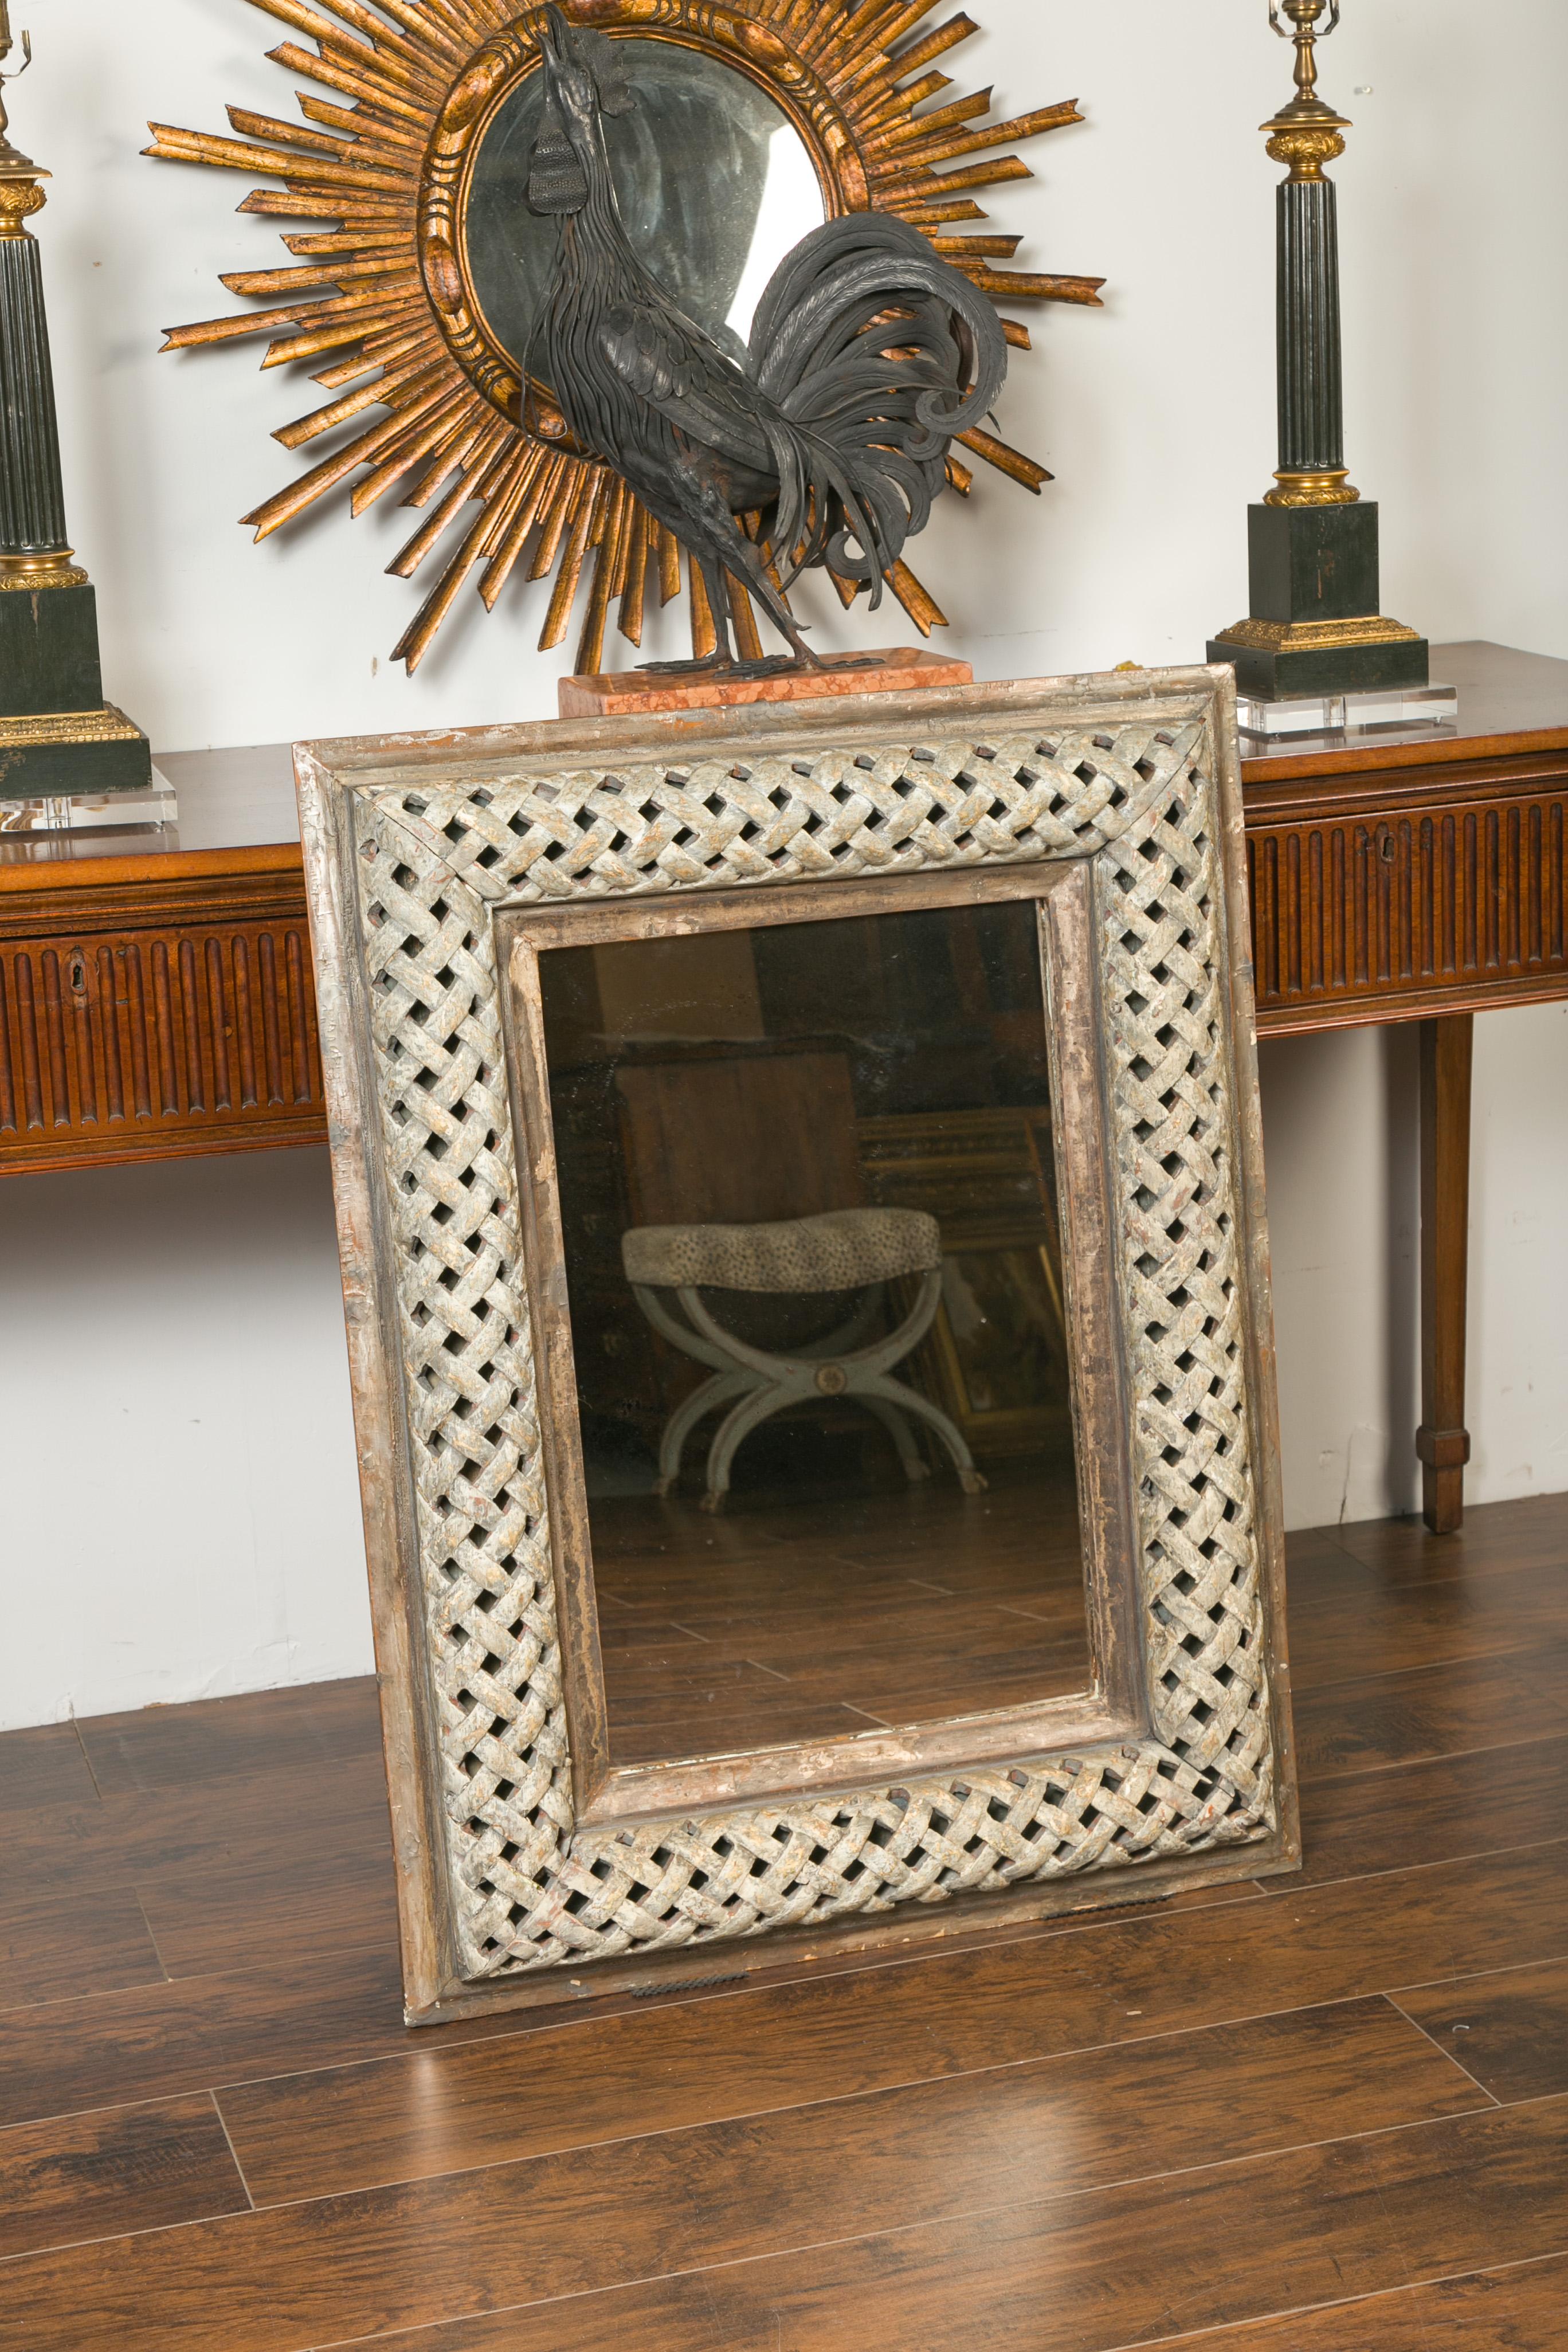 Italian 1870s Painted and Carved Wooden Mirror with Trellis Inspired Motifs 1